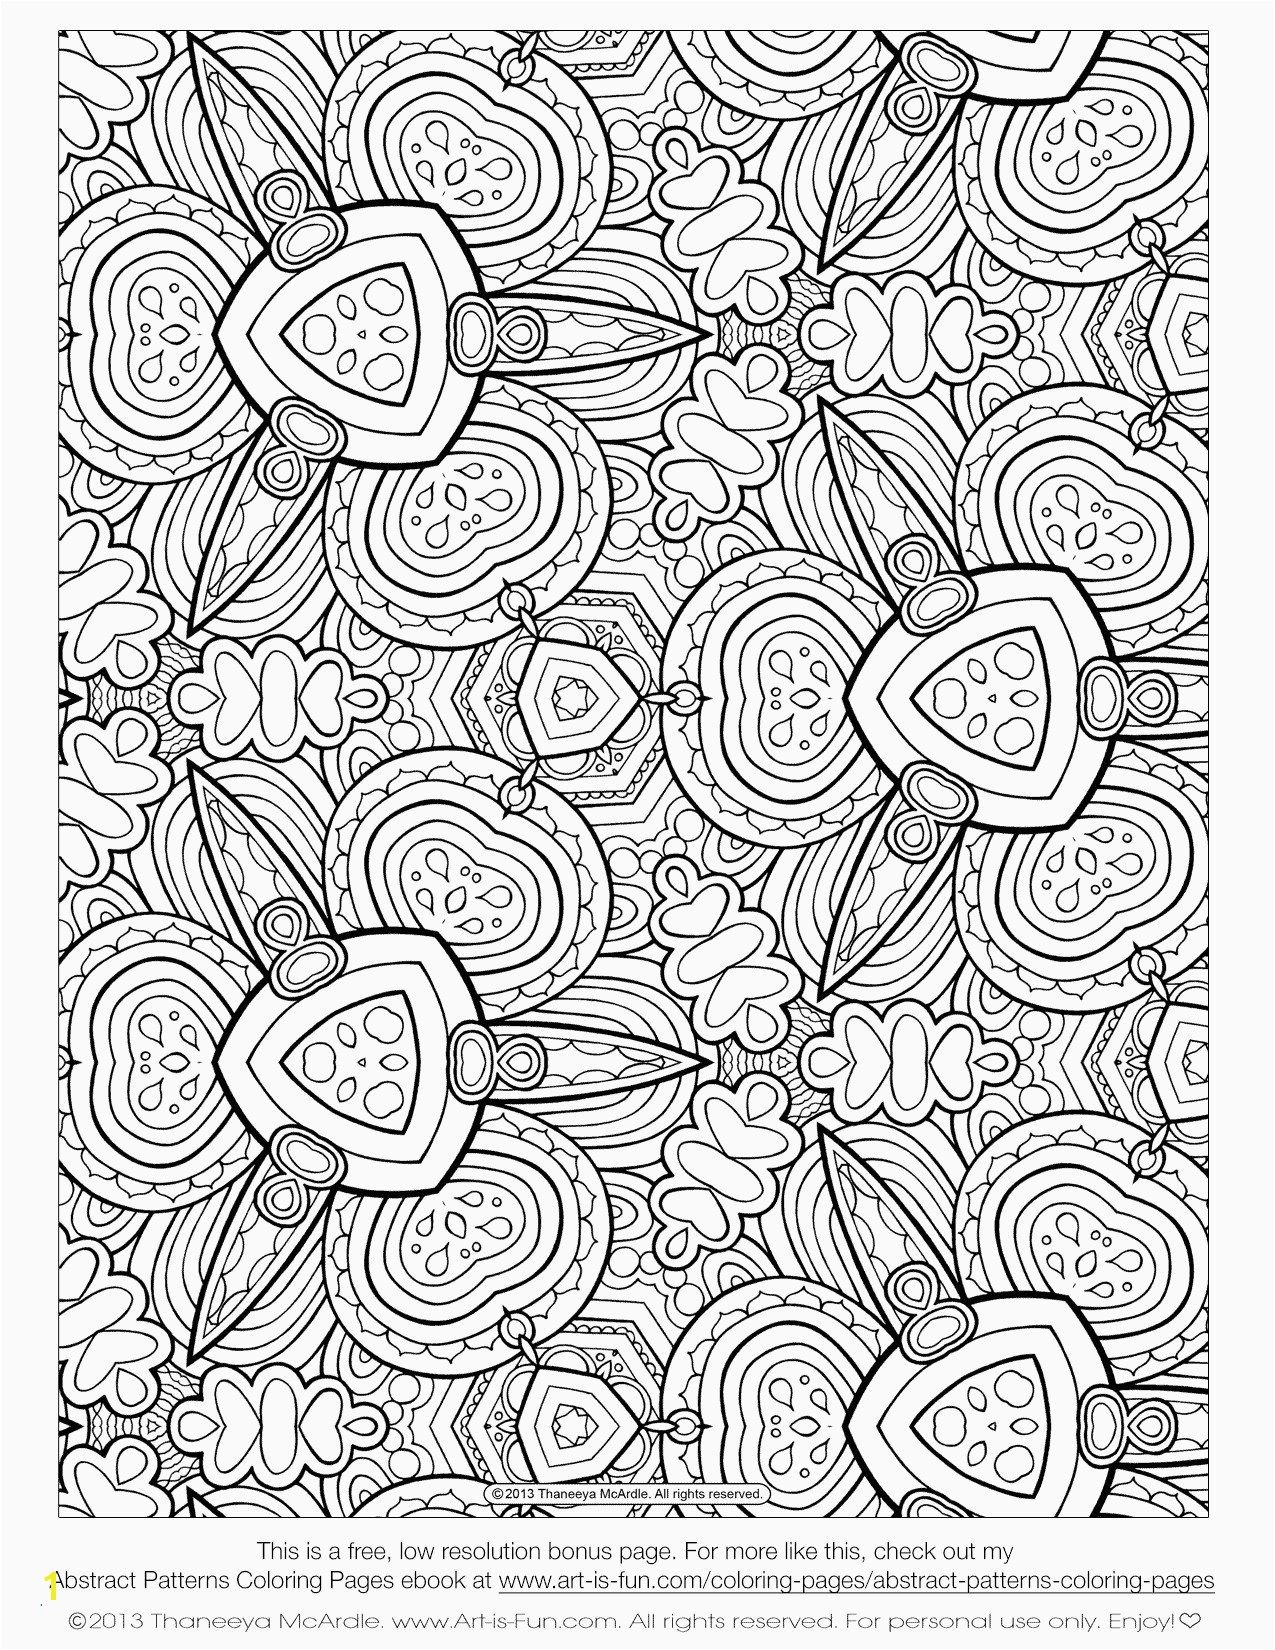 Lily Pad Coloring Page Free In Great Demand Lily Coloring Pages